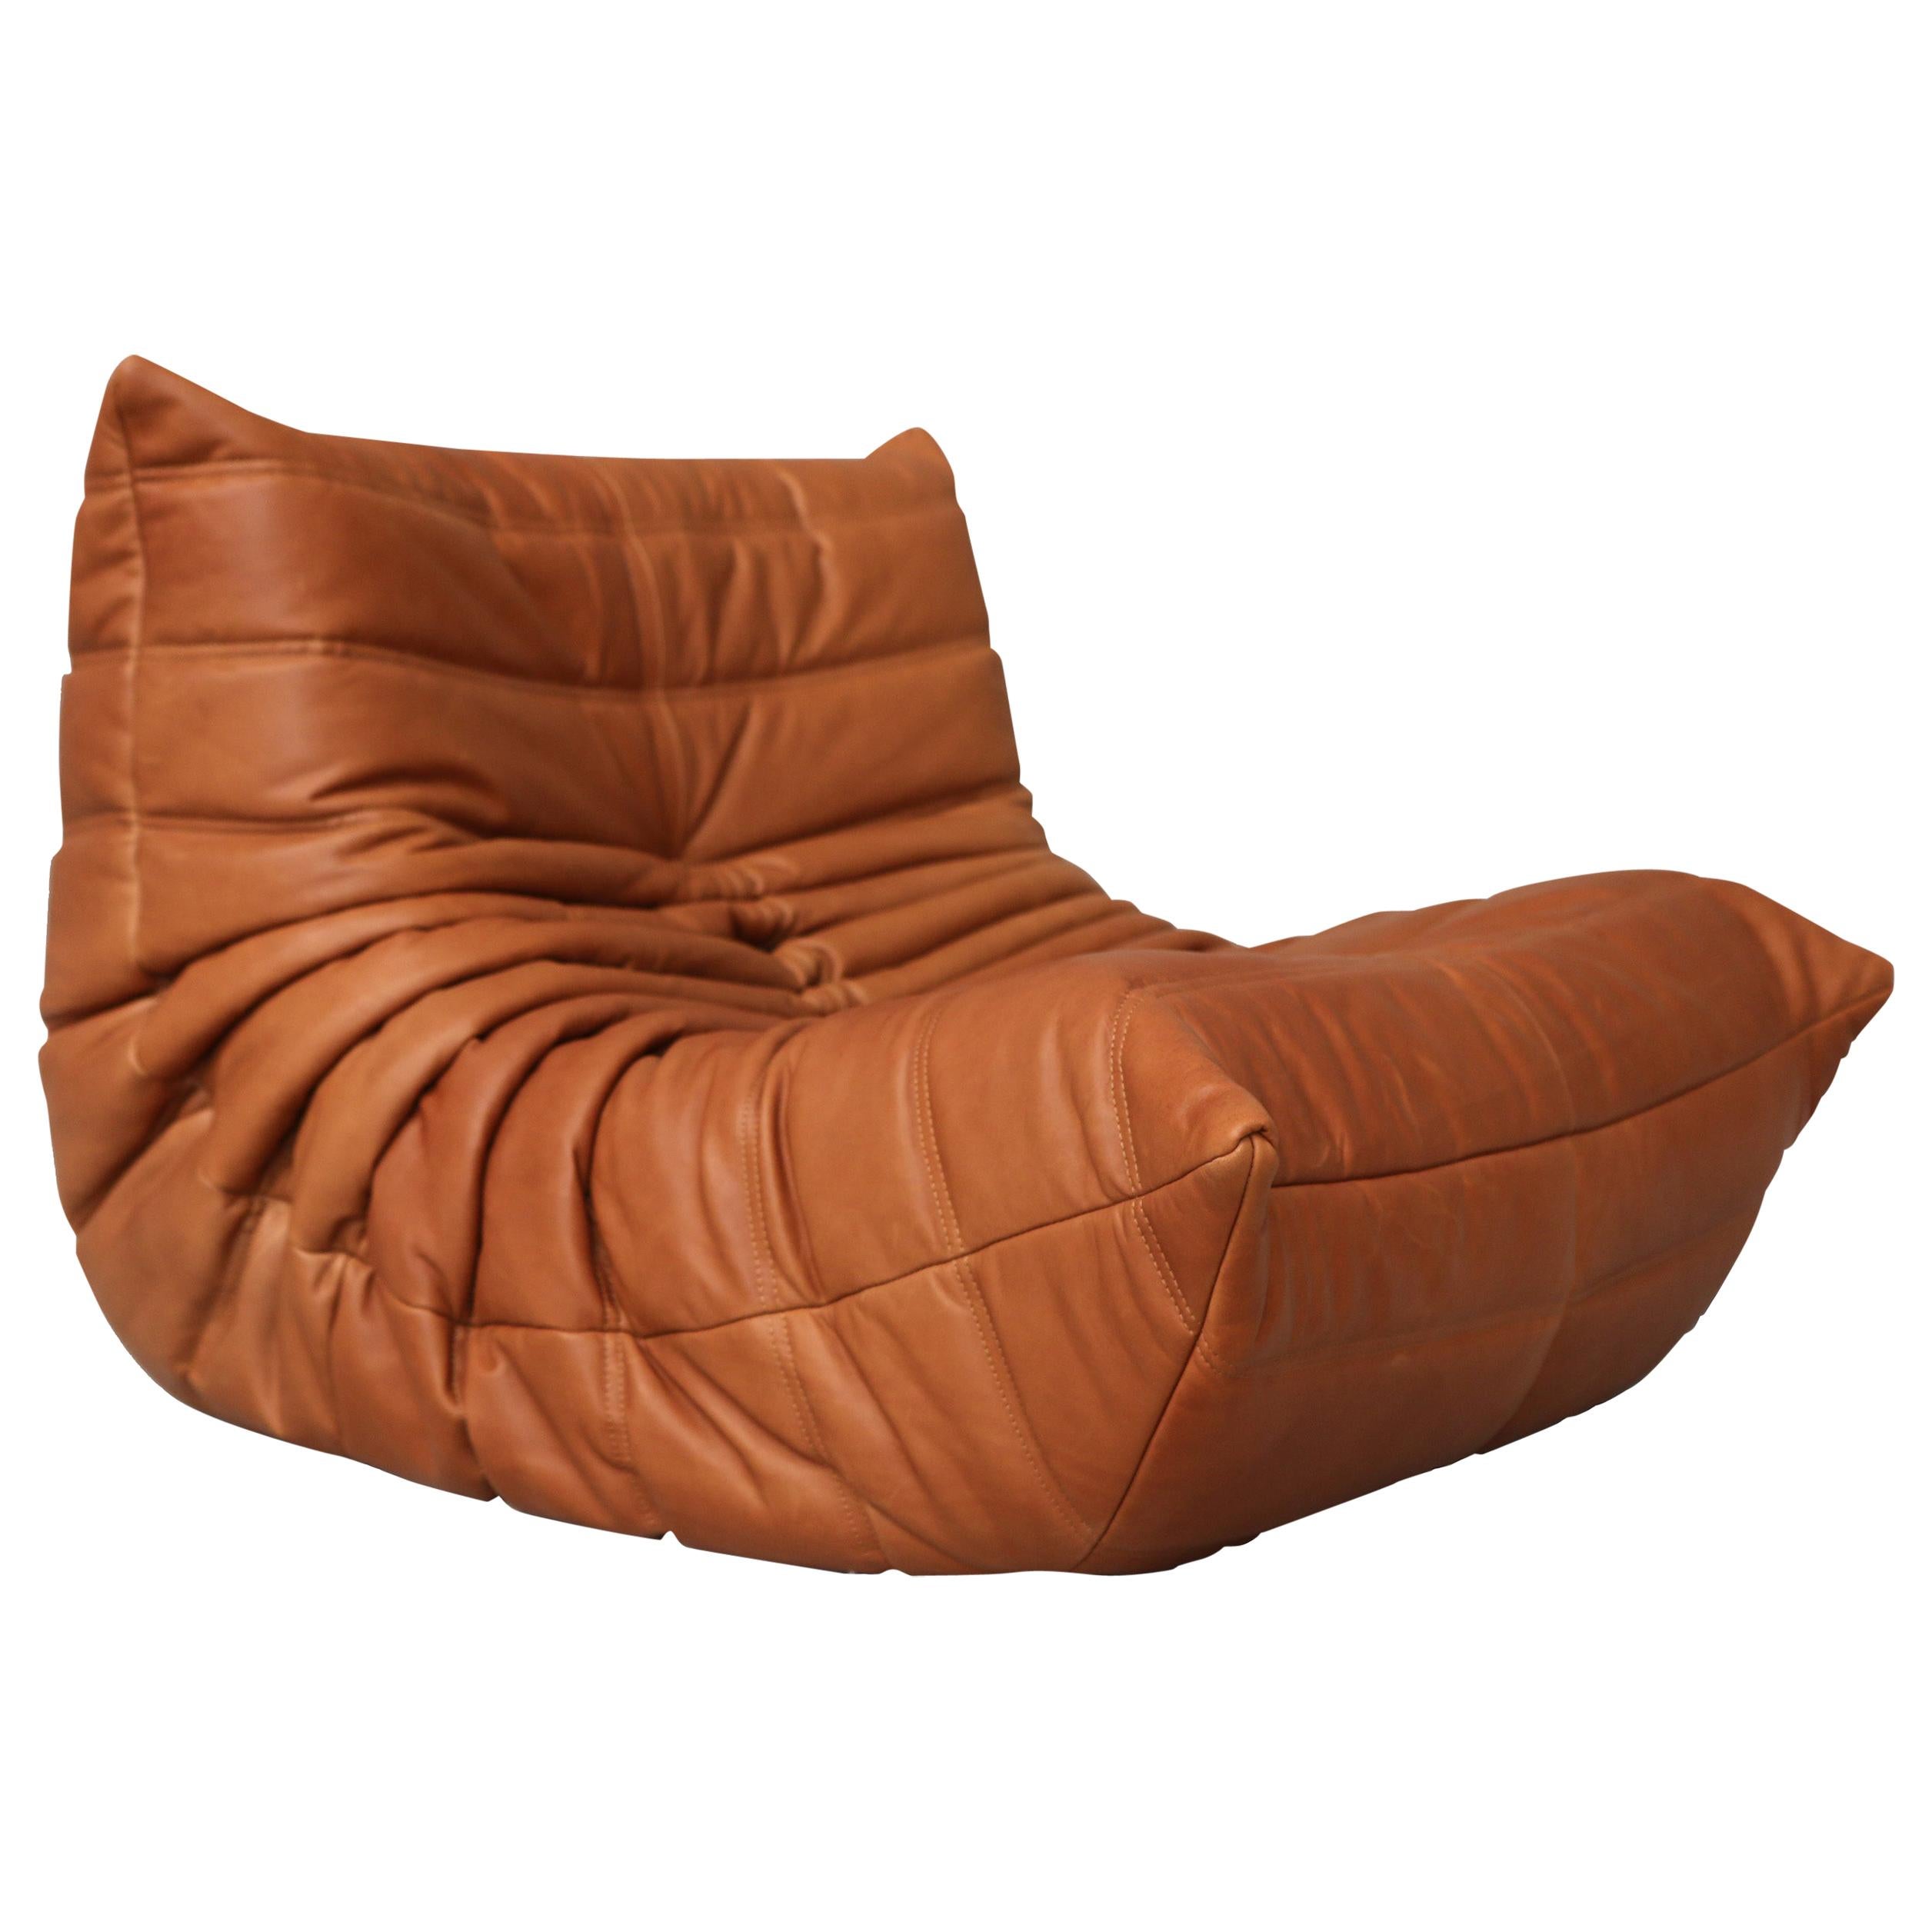 CERTIFIED Ligne Roset TOGO Fireside in natural Cognac Leather, DIAMOND QUALITY For Sale